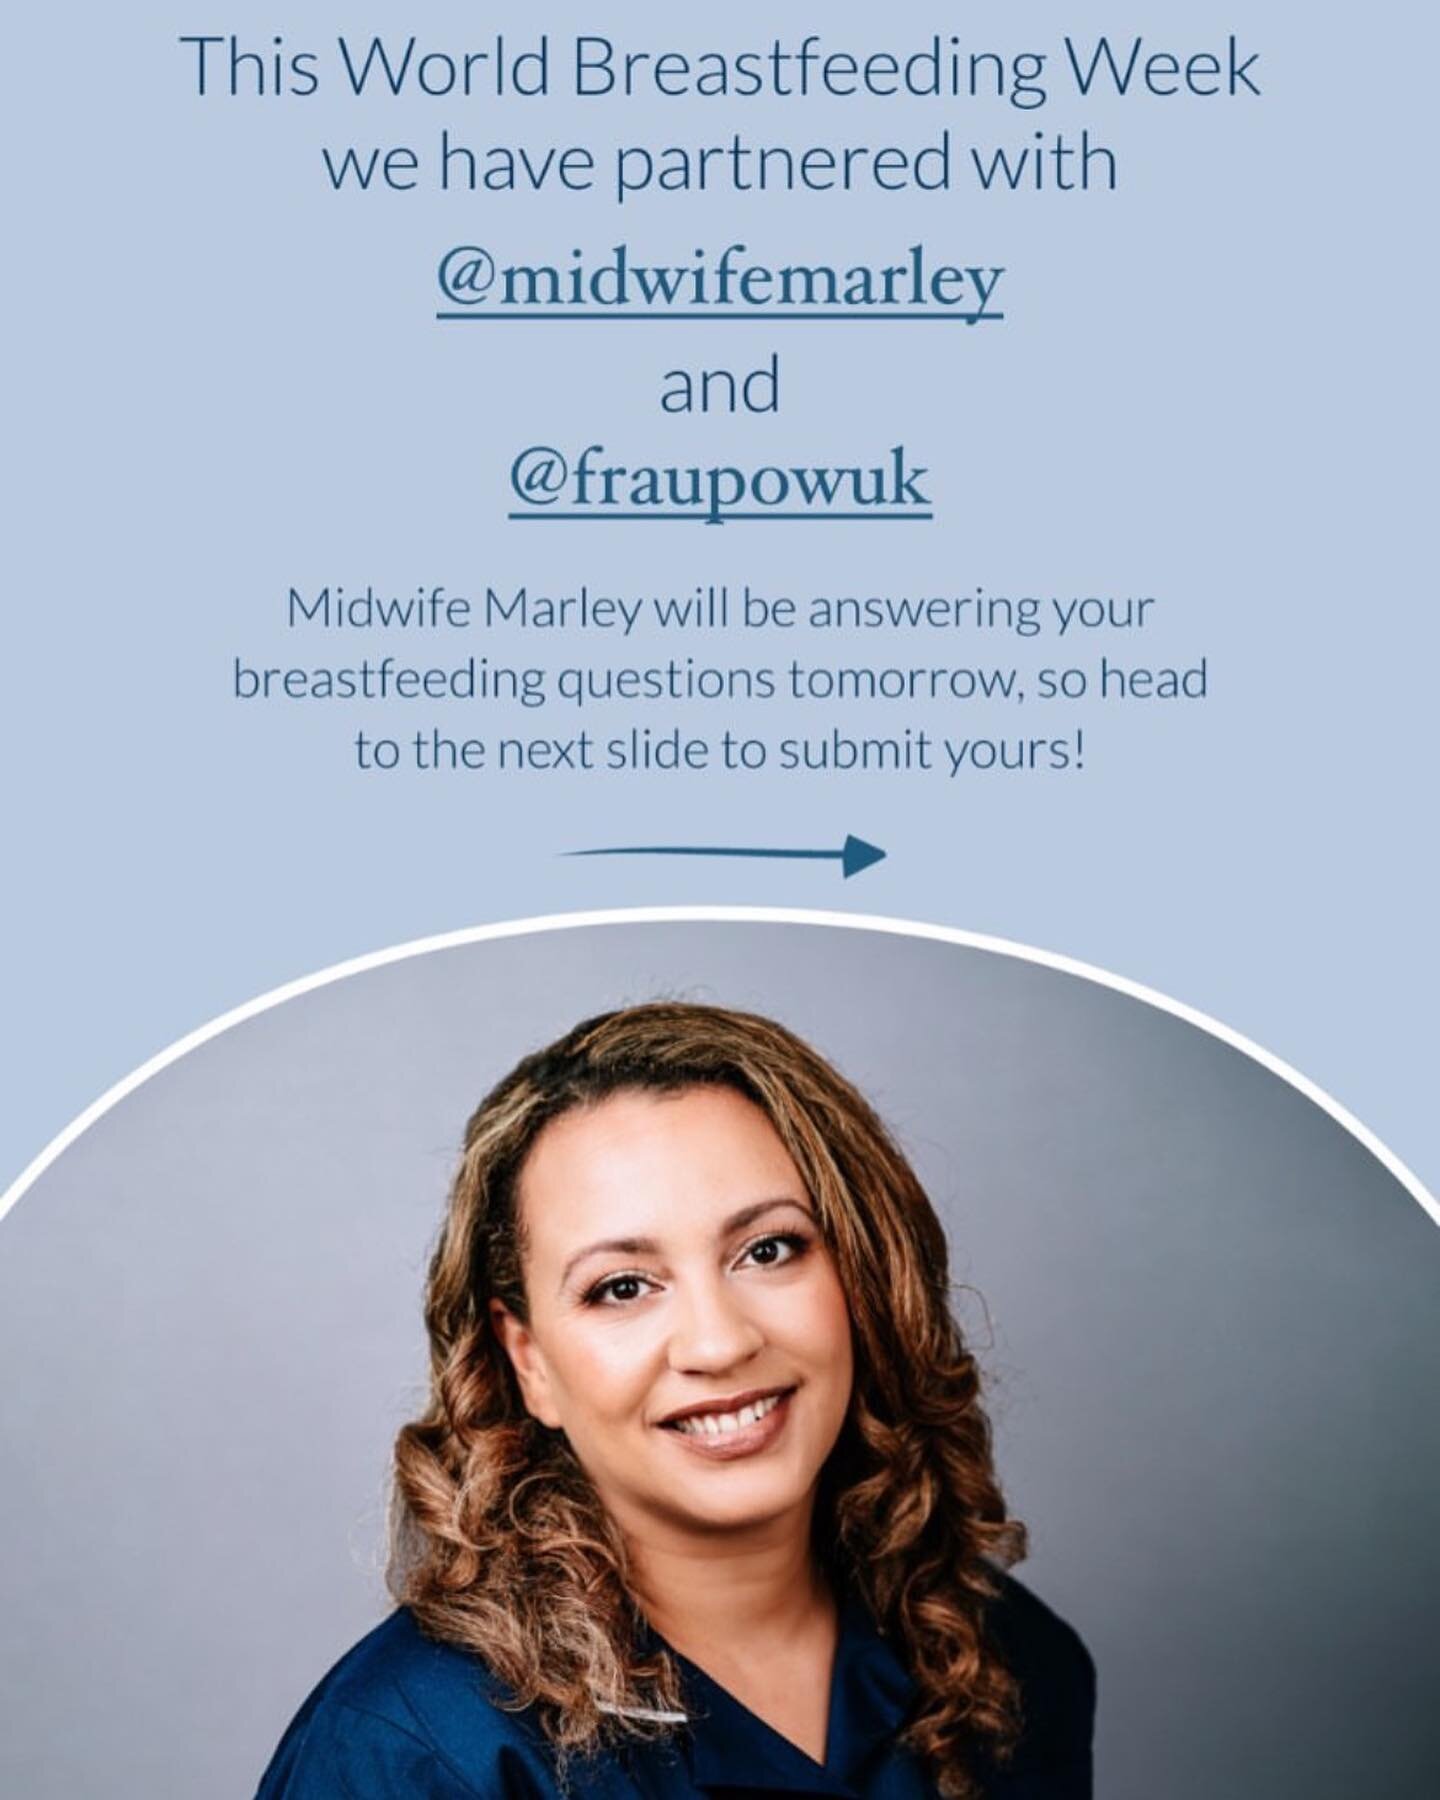 It&rsquo;s #worldbreastfeedingweek - the perfect time to launch a new partnership between @fraupowuk and @midwifemarley! We&rsquo;re kicking off with a week of activity with @jojomamanbebe and @jojobebebumps including a breastfeeding Q&amp;A on their